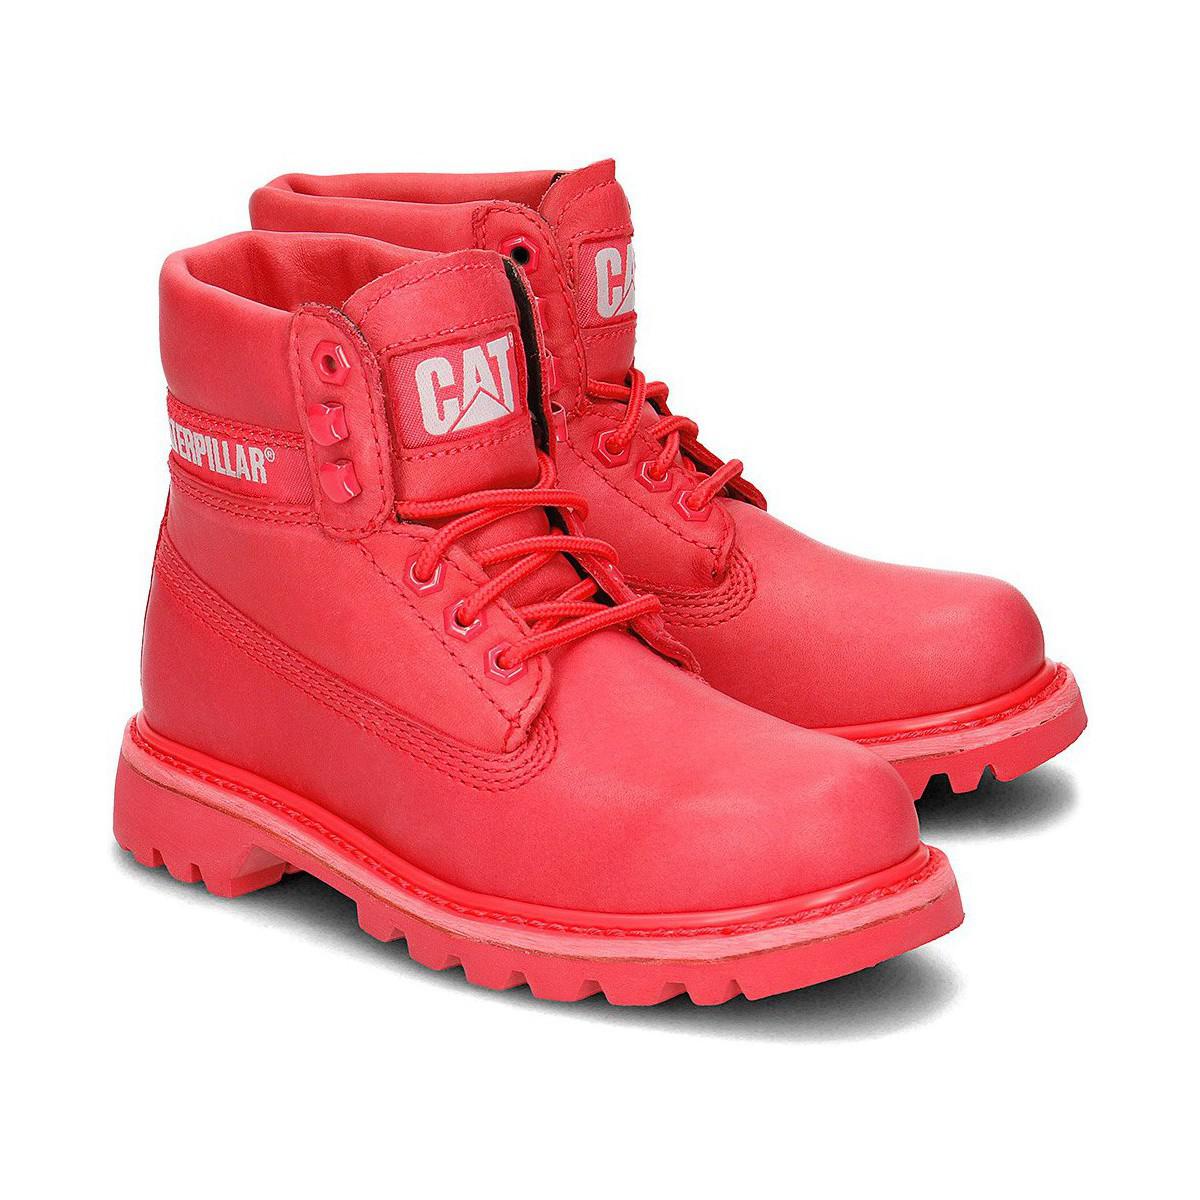 caterpillar shoes red promo code for 